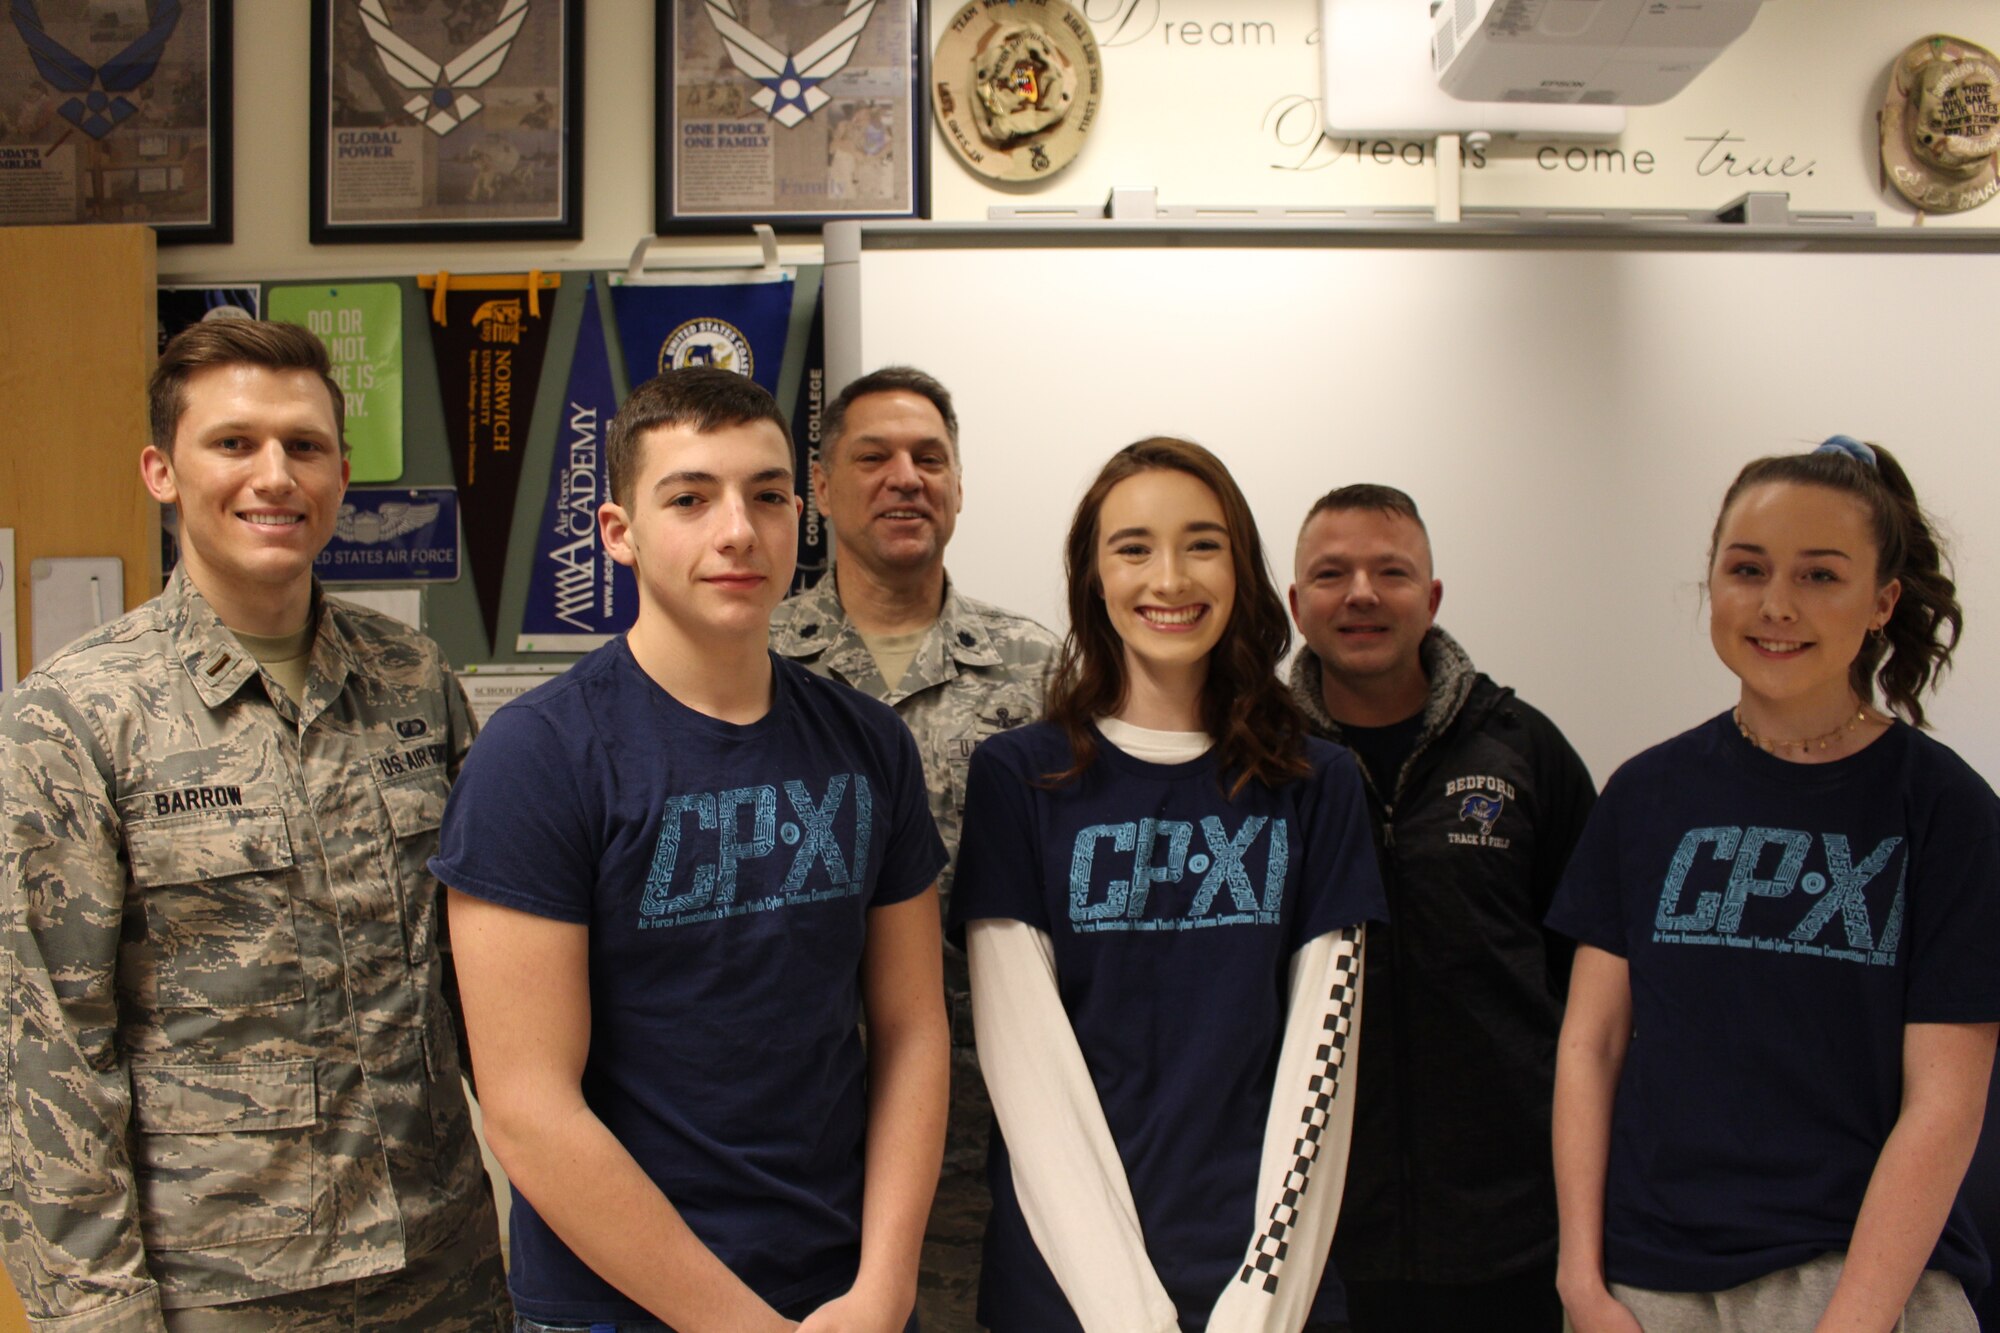 Hanscom Air Force Base mentors 2nd Lt. Gregory Barrow, and retired Lt. Col. Ken Mierz, and retired Master Sgt. Charlie Humphrey pose with CyberPatriot competitors Cadet Col. Cameron Edens, left, Cadet Col. Mak Marrs, center, and Cadet Staff Sgt. Avree Dillingham, from Bedford High School, Bedford, Mass., Feb. 25. CyberPatriot is an Air Force Association-sponsored program designed to train middle- and high-school students in network operations and security. This was the first year Hanscom mentored teams. (U.S. Air Force photo courtesy of 2nd Lt. Gregory Barrow)